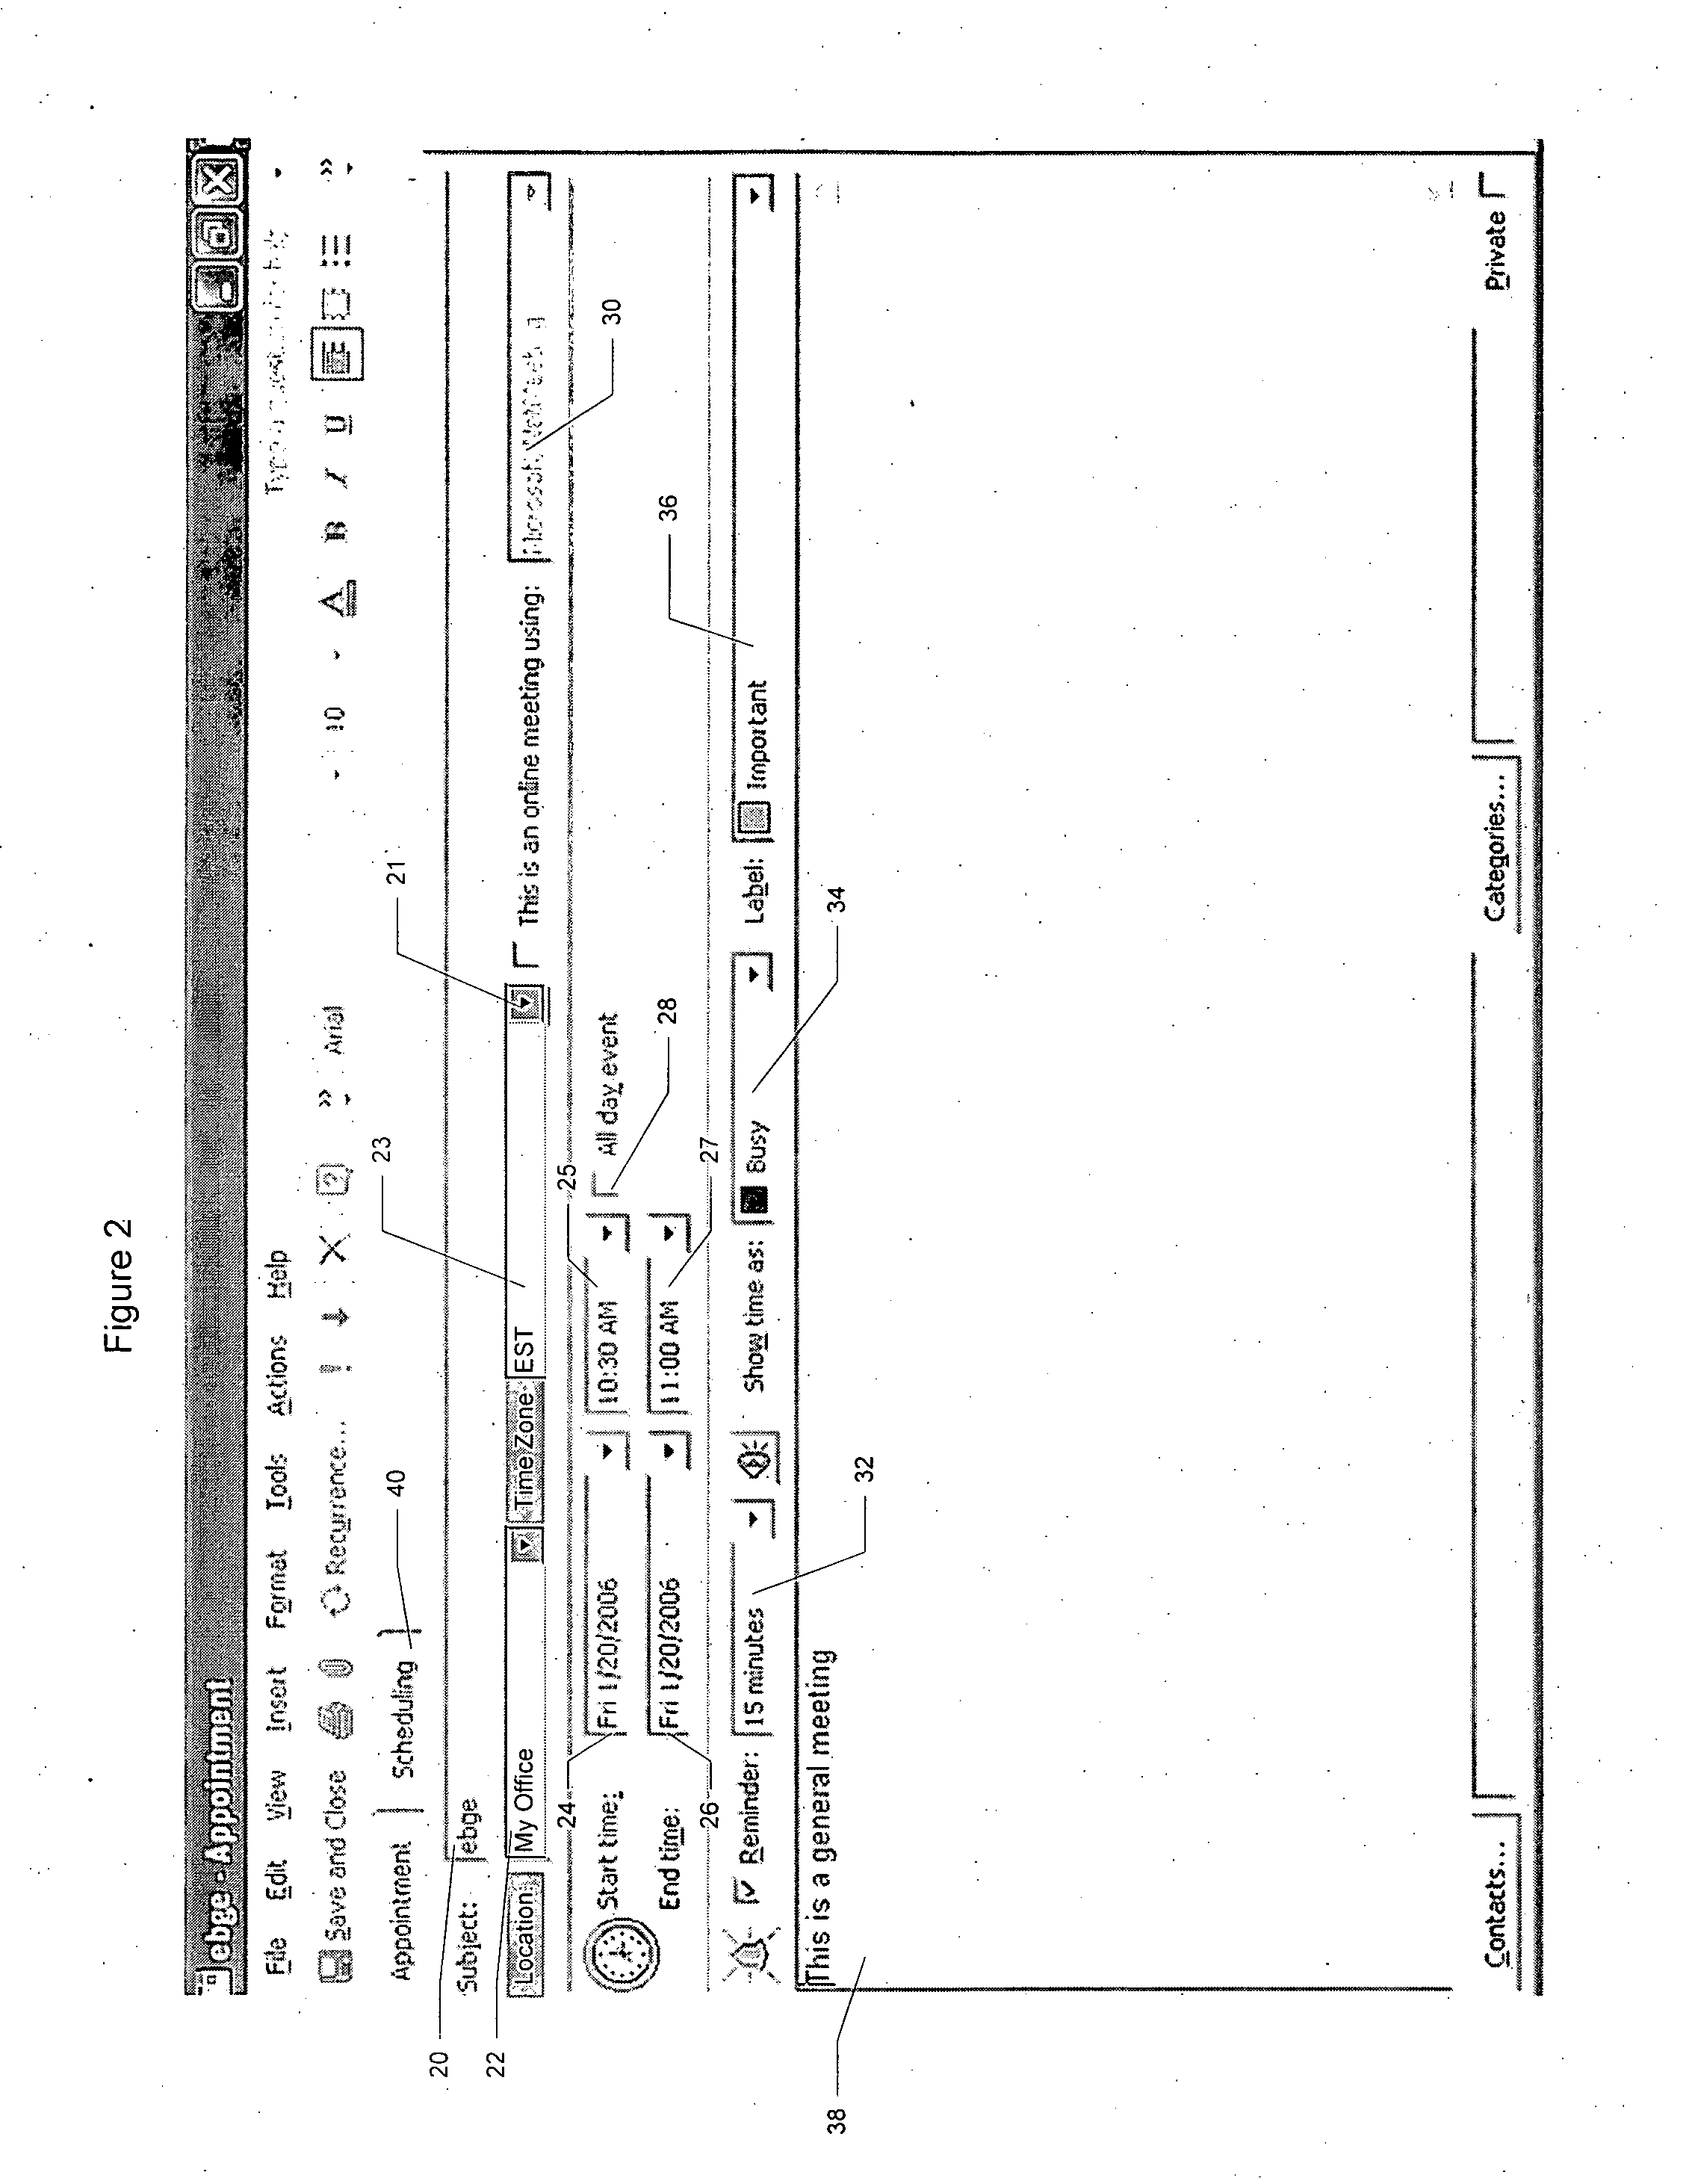 Method and apparatus for scheduling appointments for multiple location entries